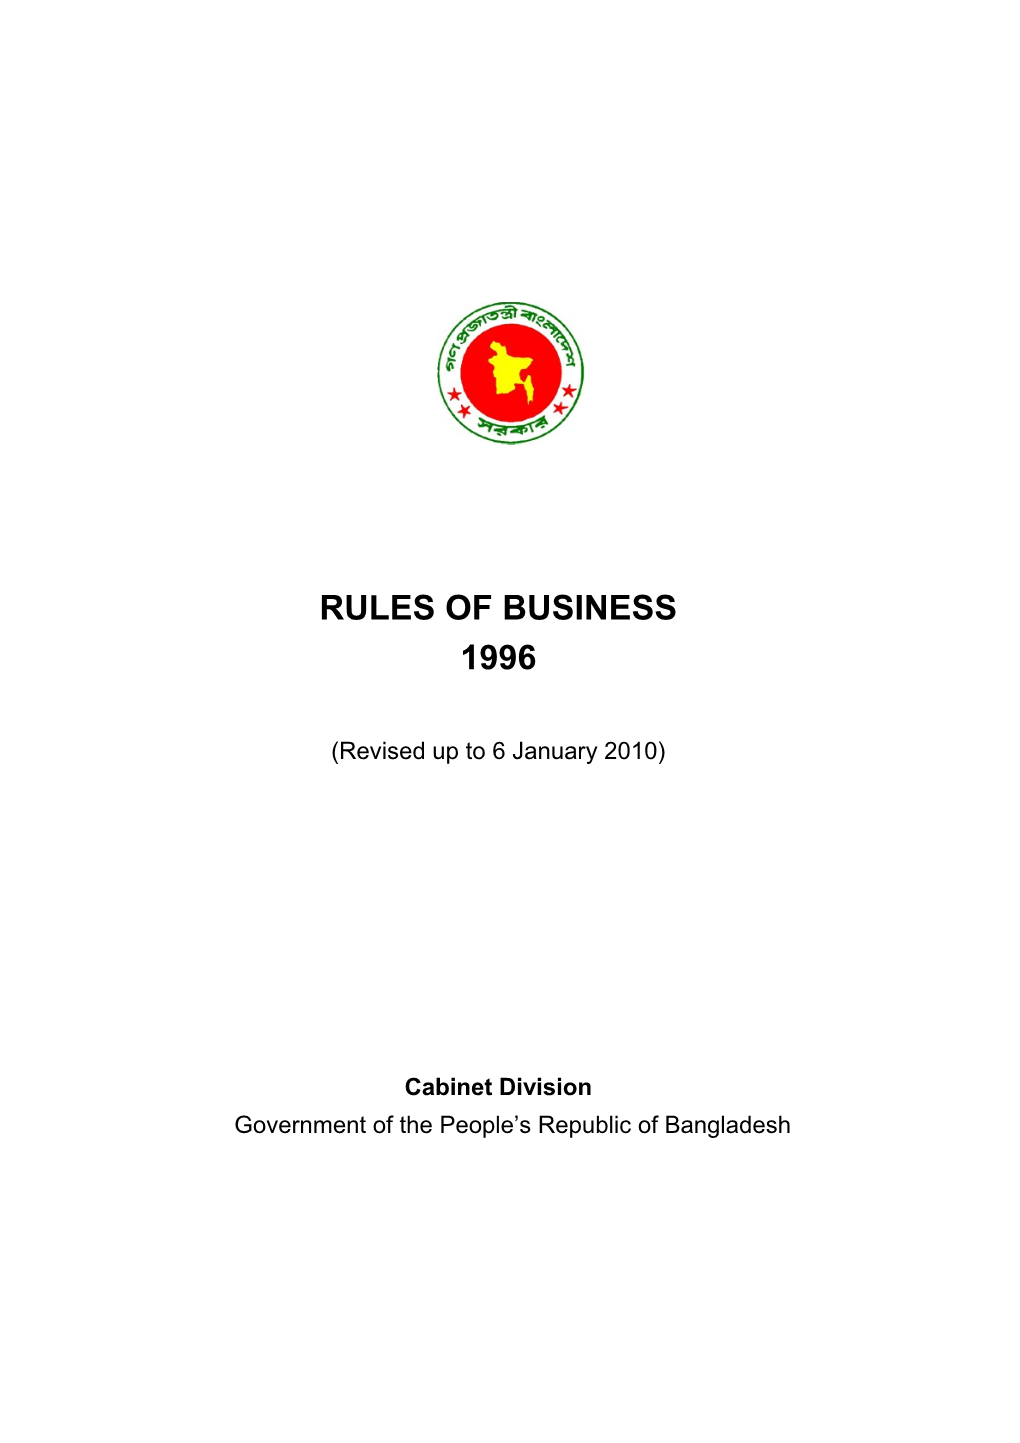 Rules of Business